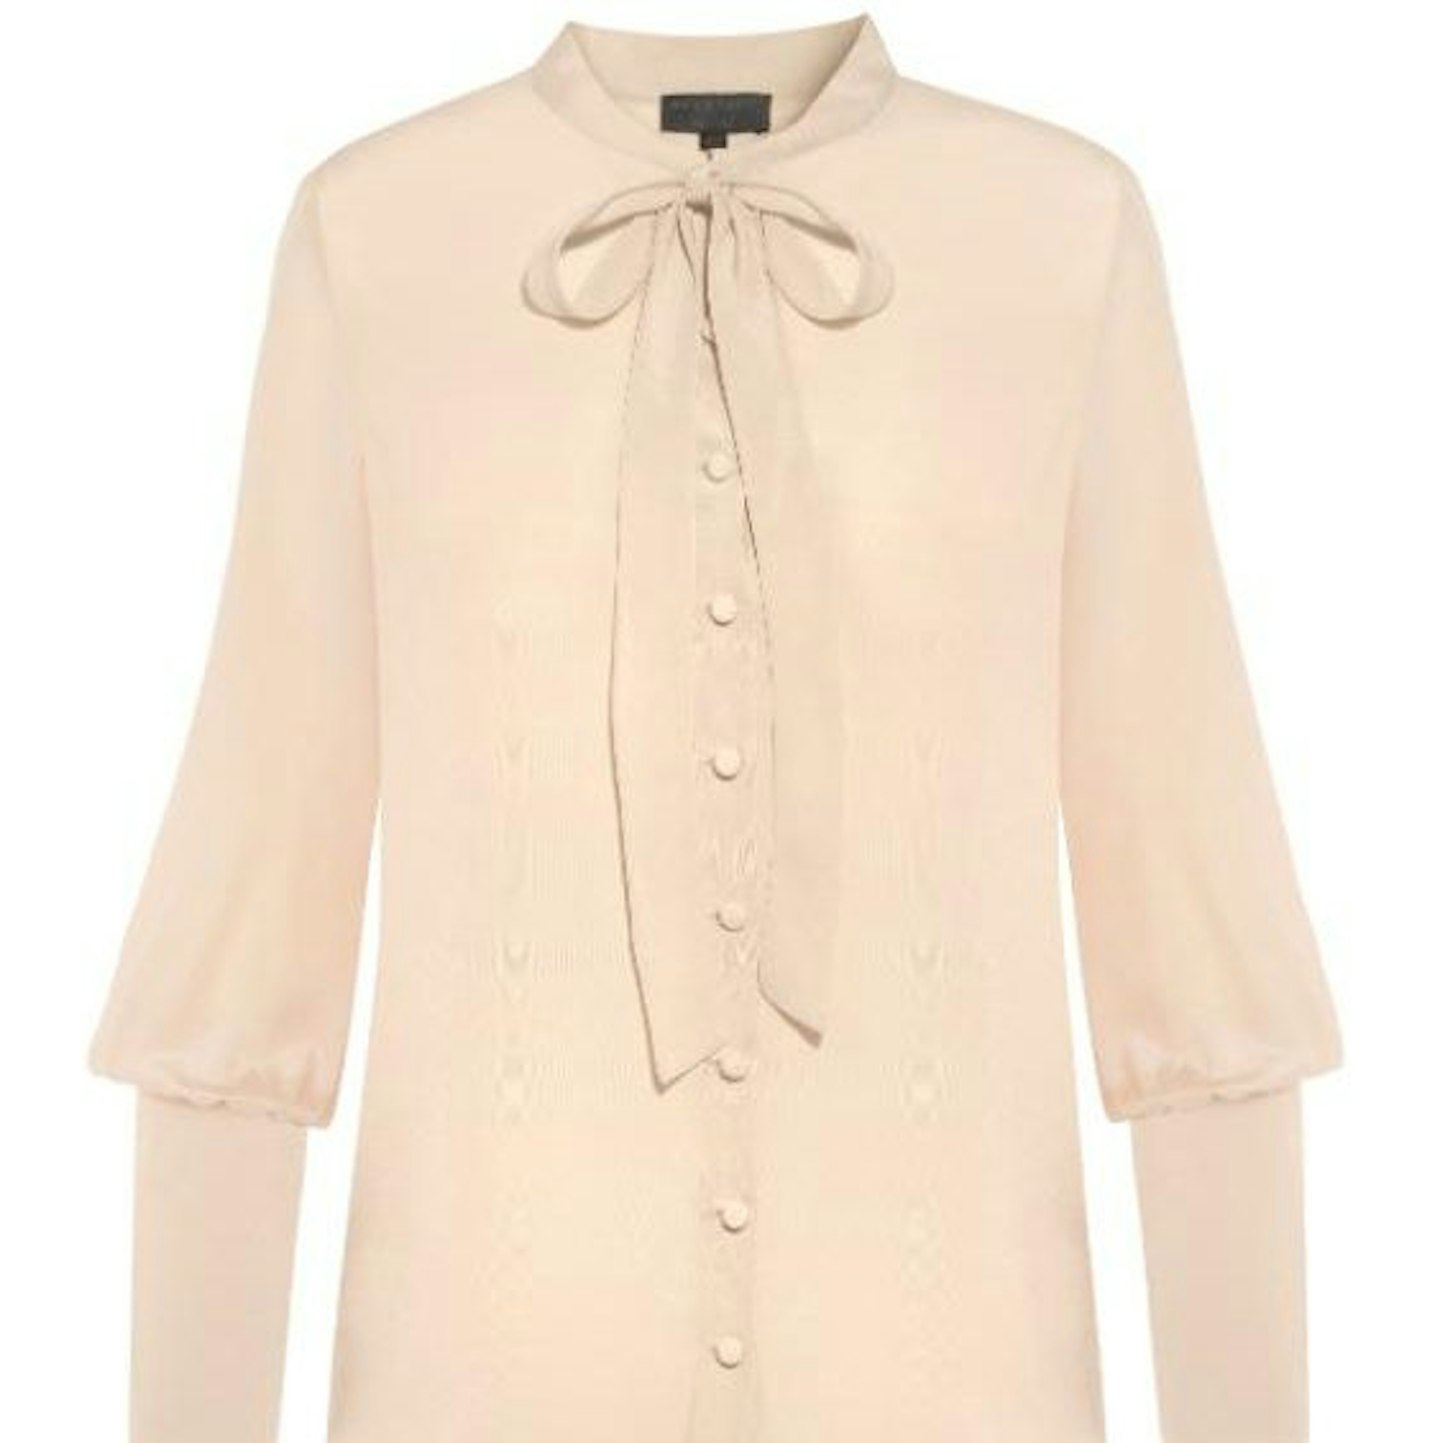 Belstaff Liv Tyler Lucy pussy bow blouse £395